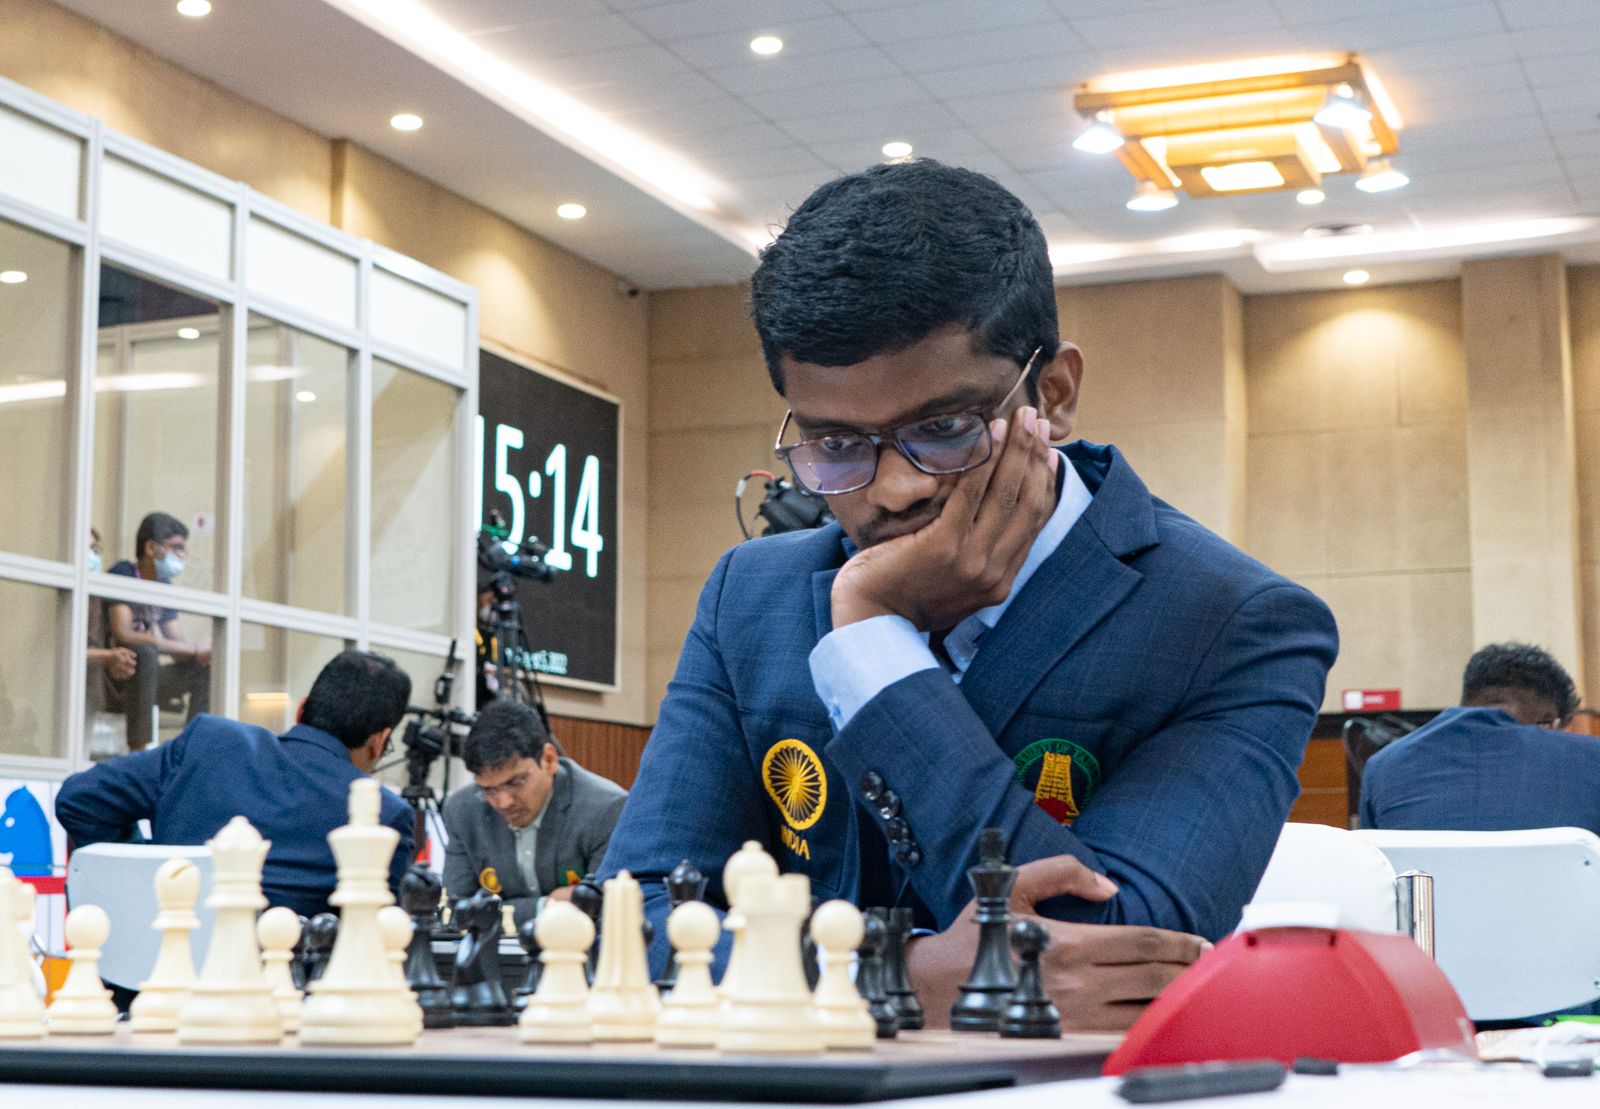 Chess Olympiad 2022 Results - Killer Chess Training